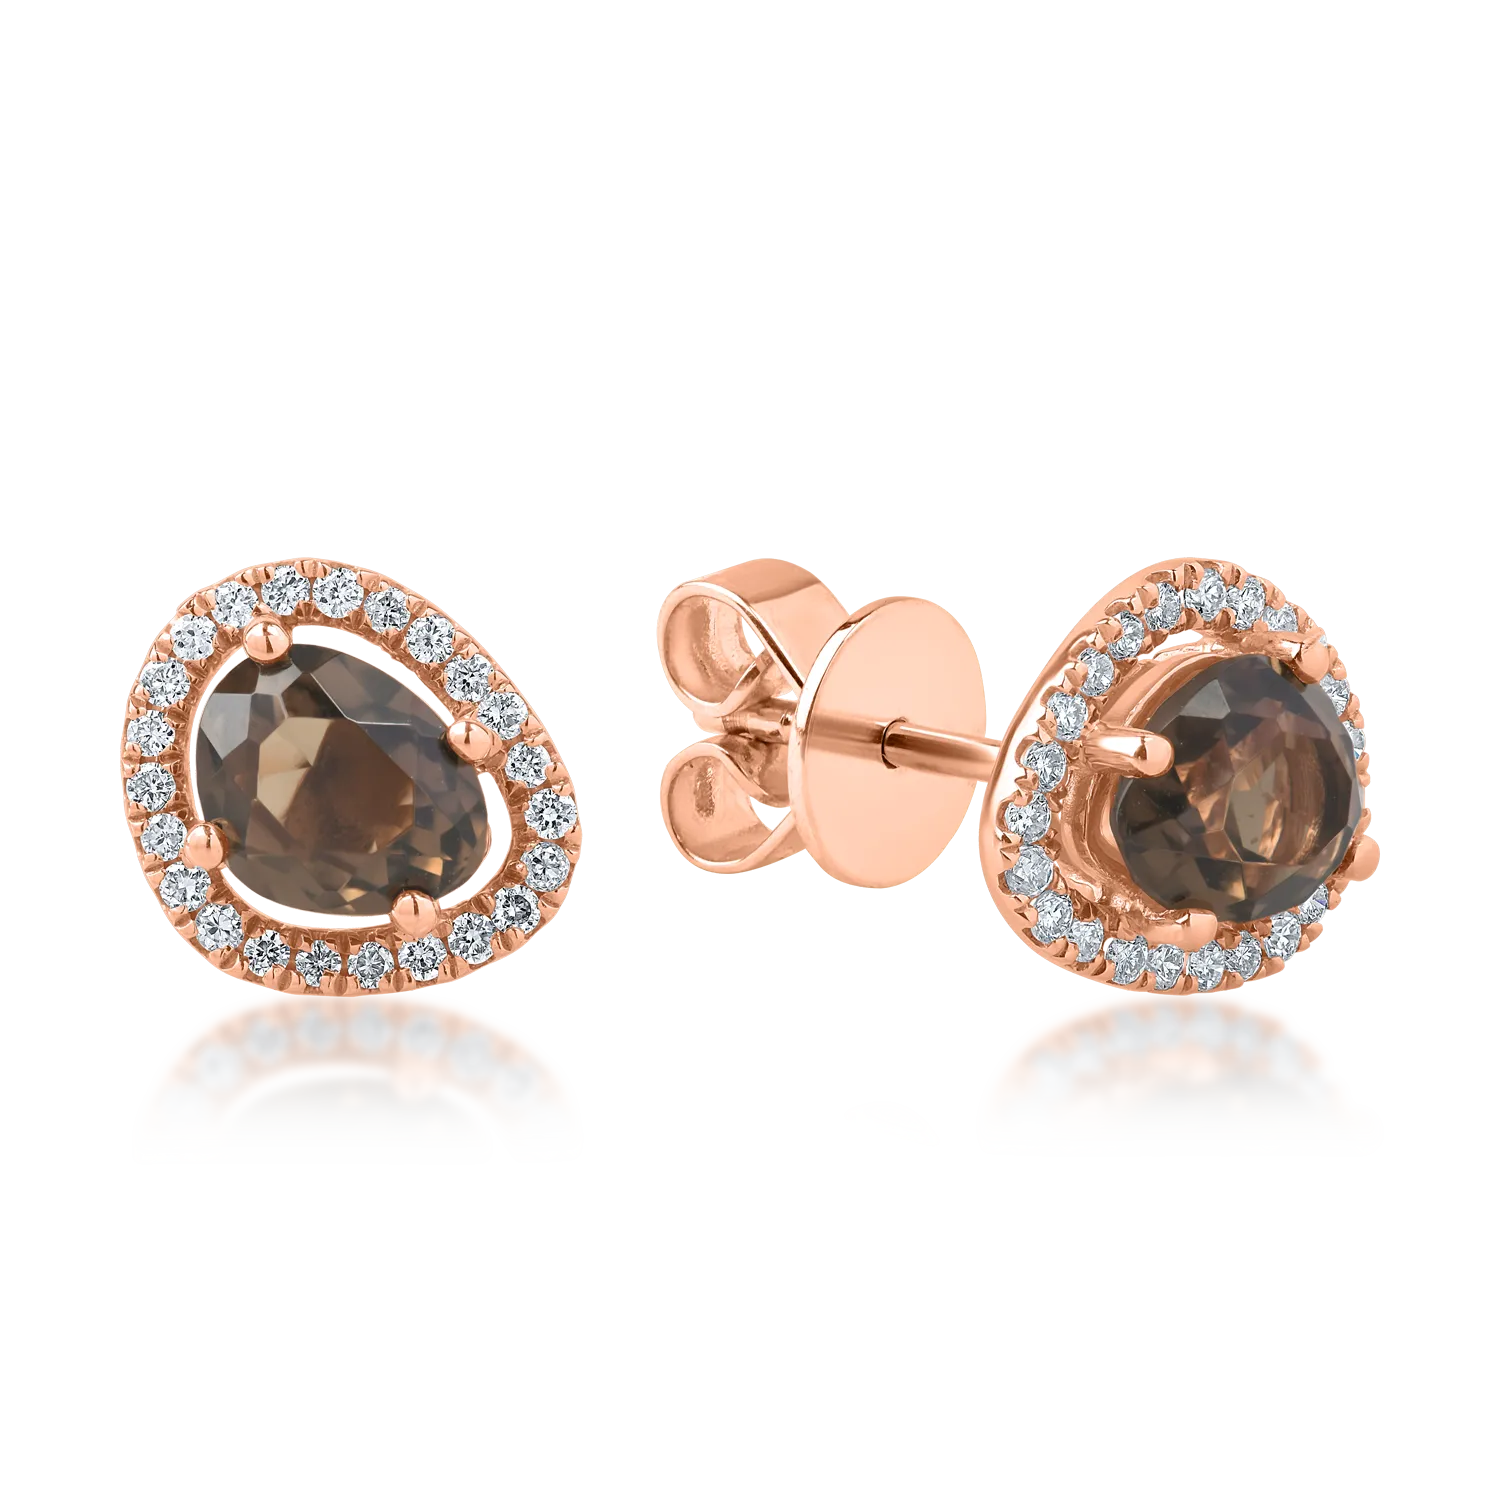 Rose gold stud earrings with 1.1ct smoky quartz and 0.1ct diamonds